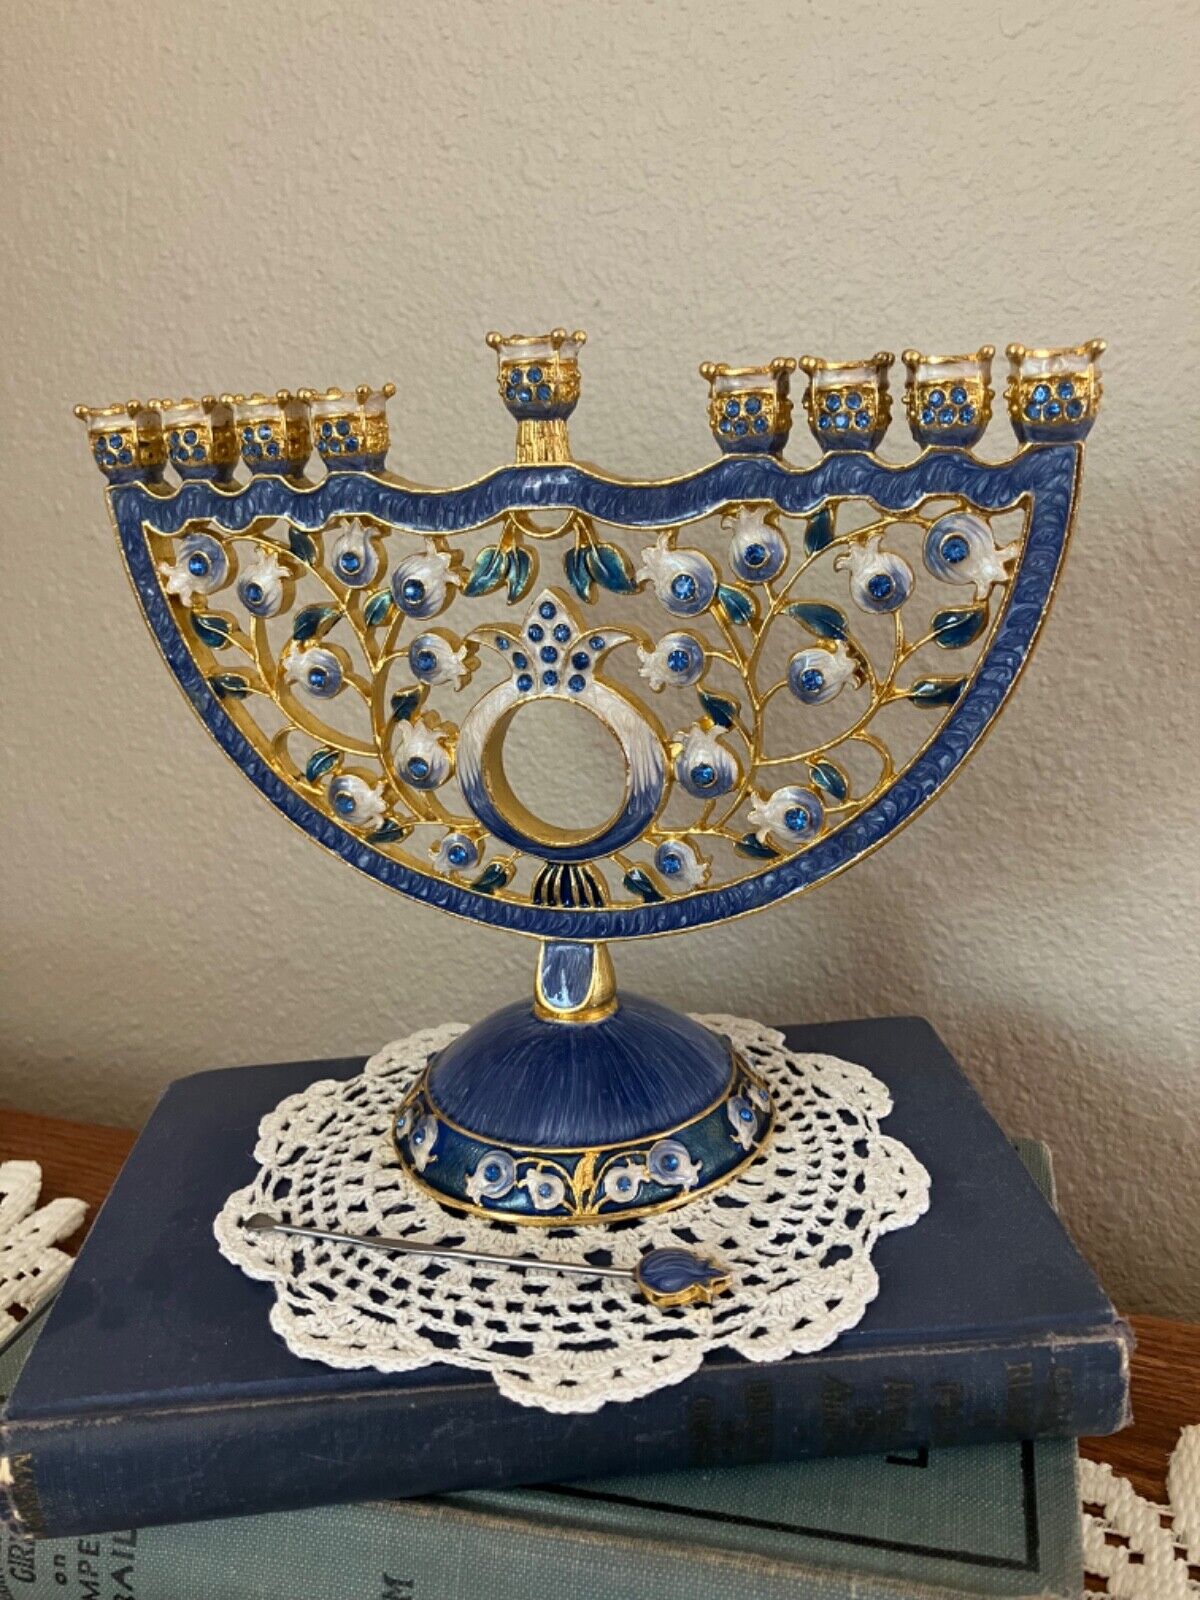 Menorah Candelabra, 9 Branch, Embellished with an Intertwining Flowers Design